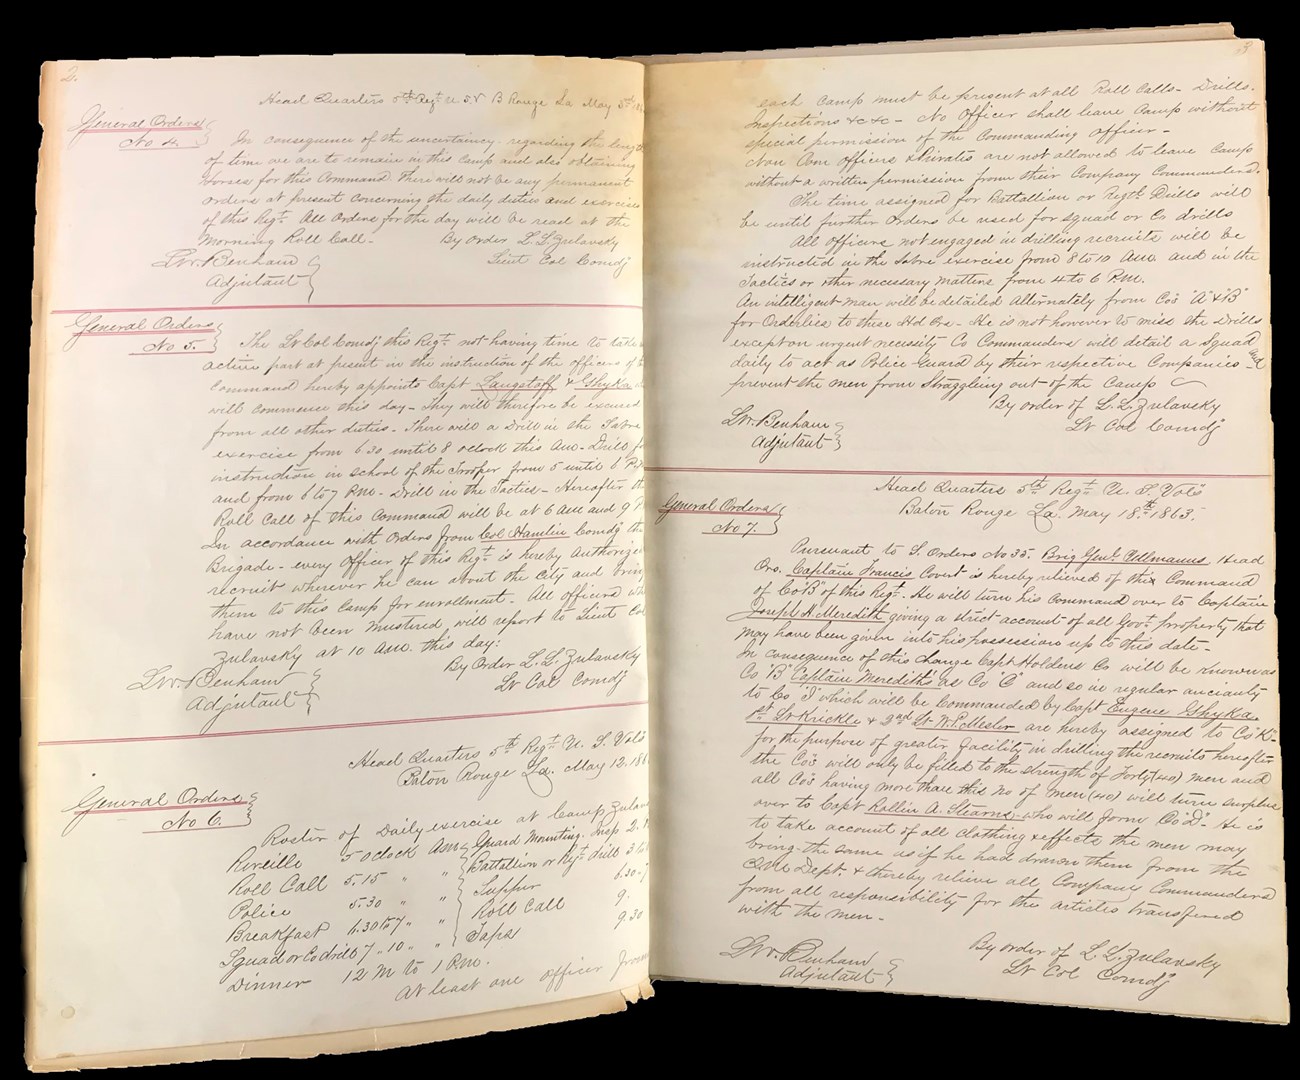 Historical document showing the Officer's orders logbook, 82nd U.S. Colored Troops Infantry